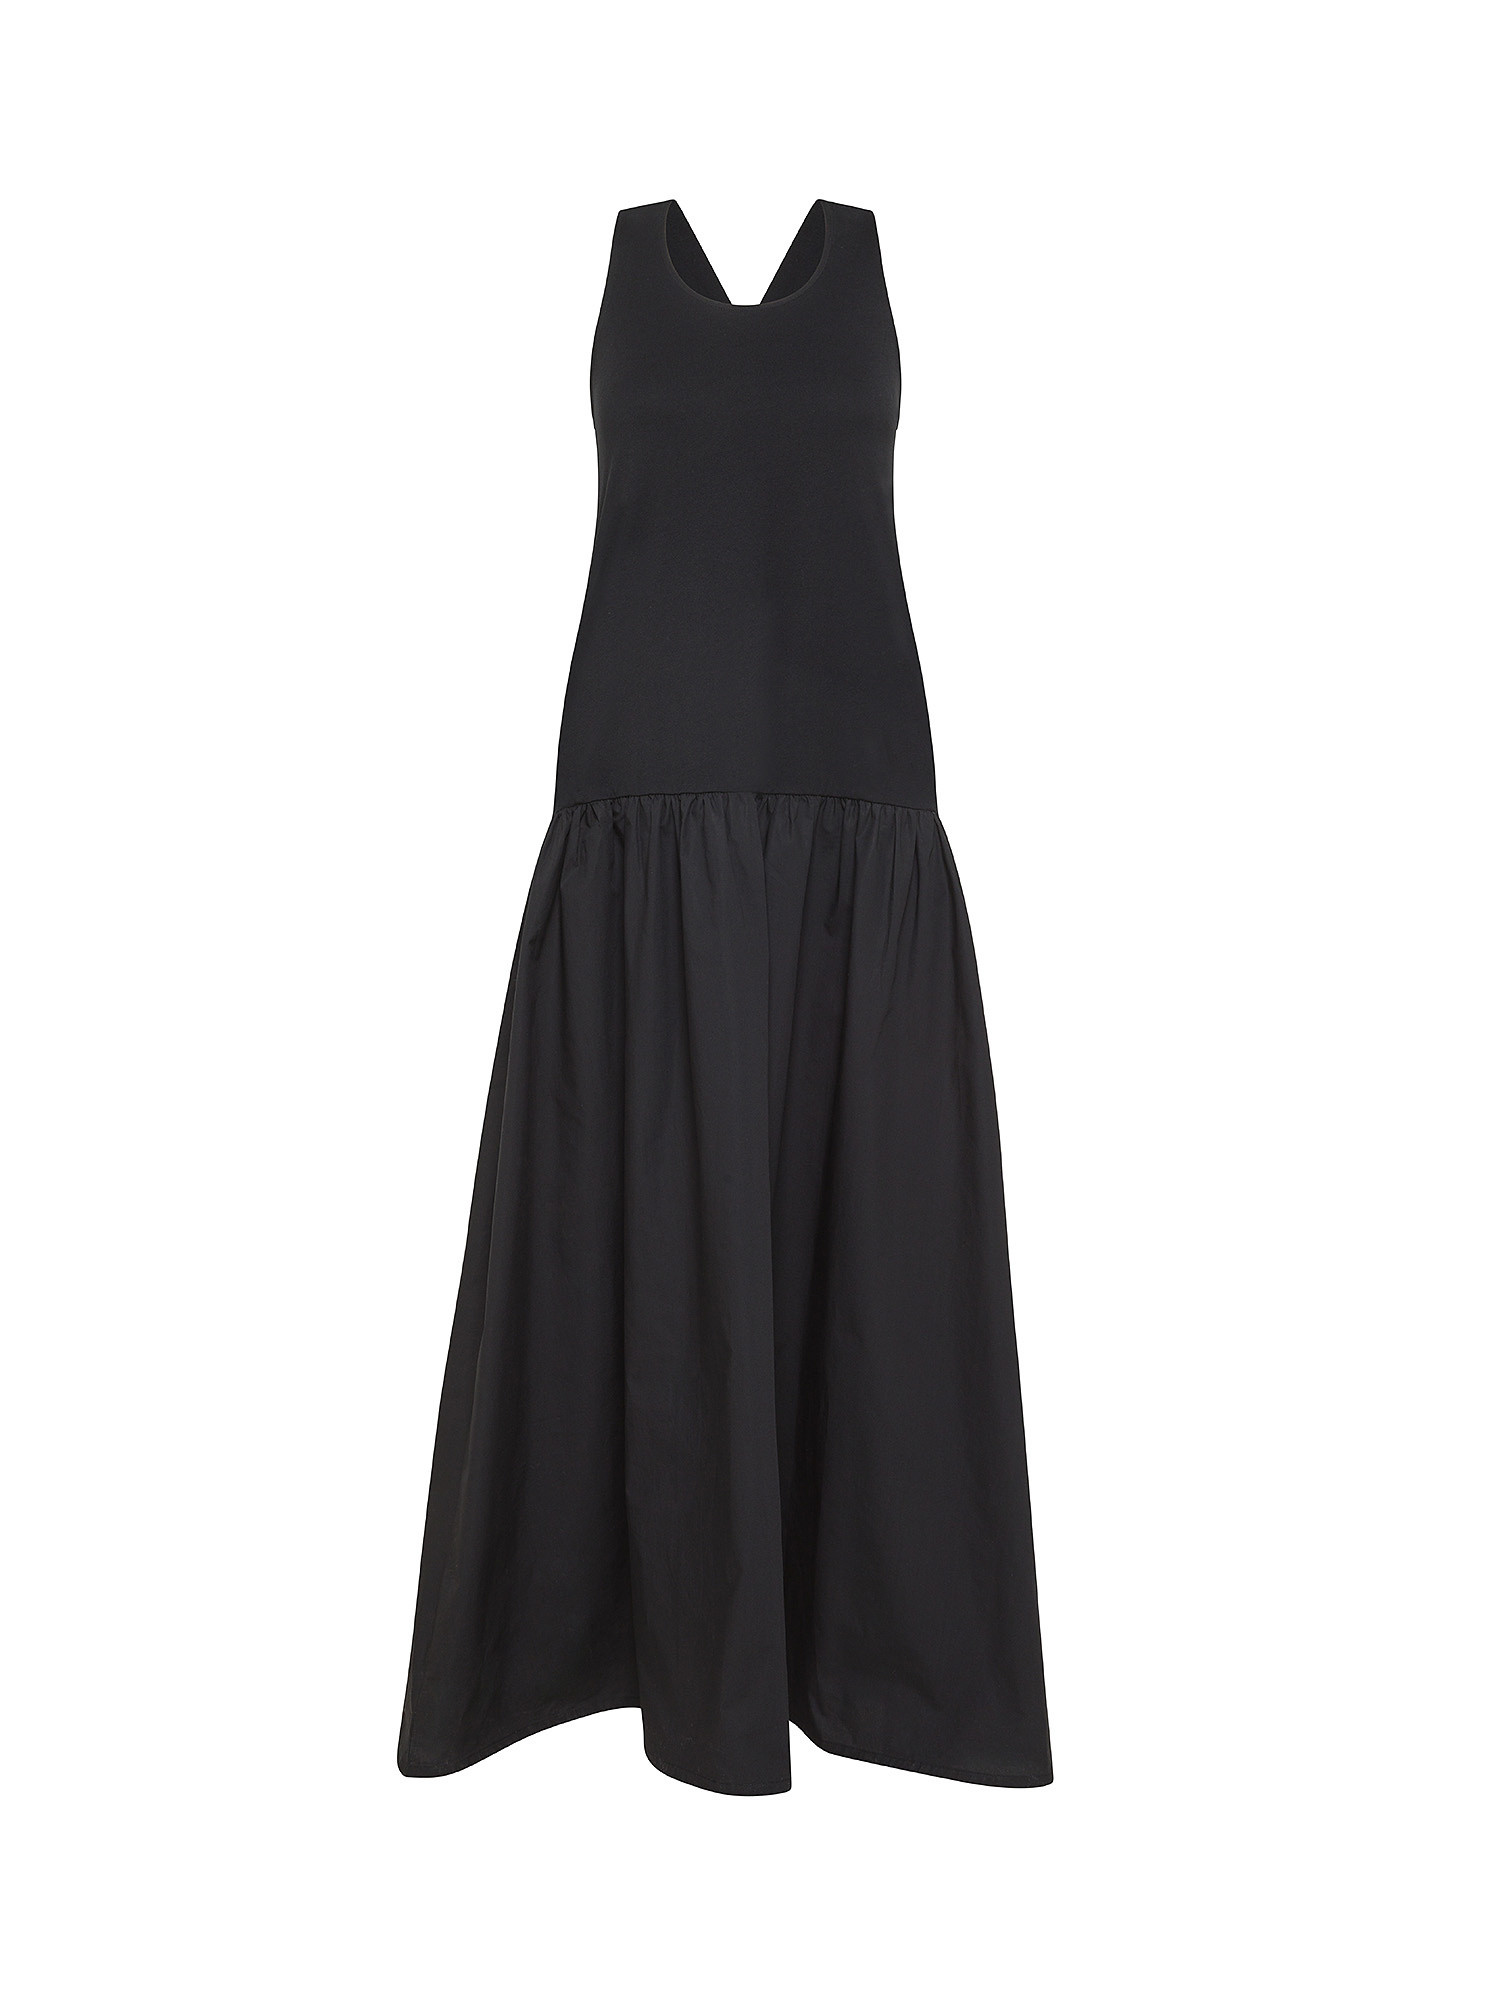 Attic and Barn - Dallas dress in cotton, Black, large image number 0